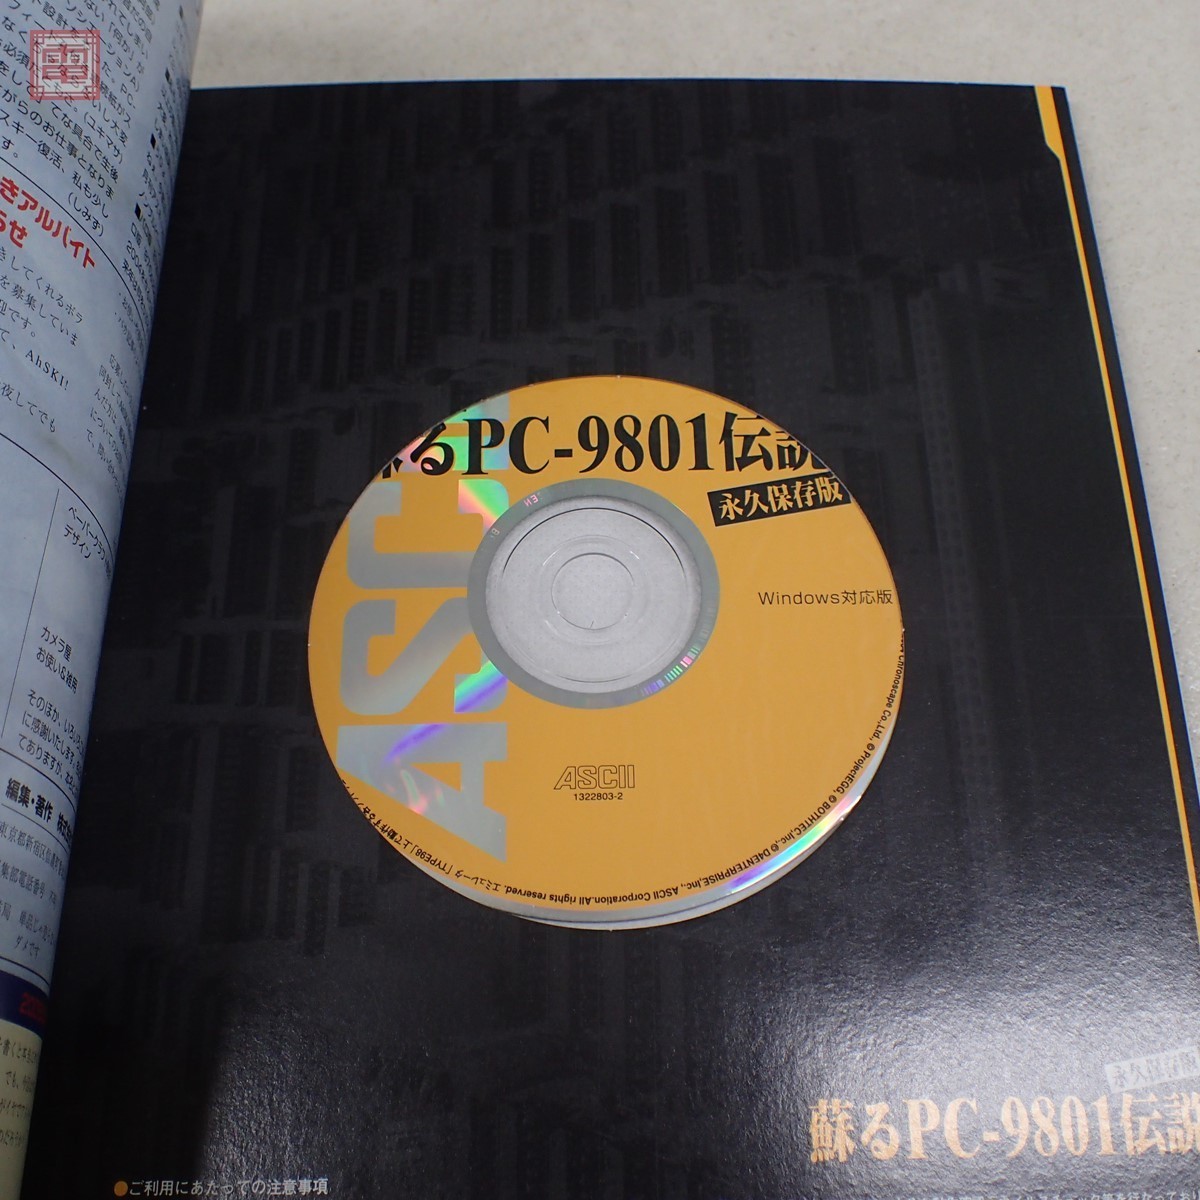  publication monthly ASCII separate volume ..PC-9801 legend permanent preservation version ASCII masterpiece game 26ps.@ compilation binding *CD-ROM unopened [PP